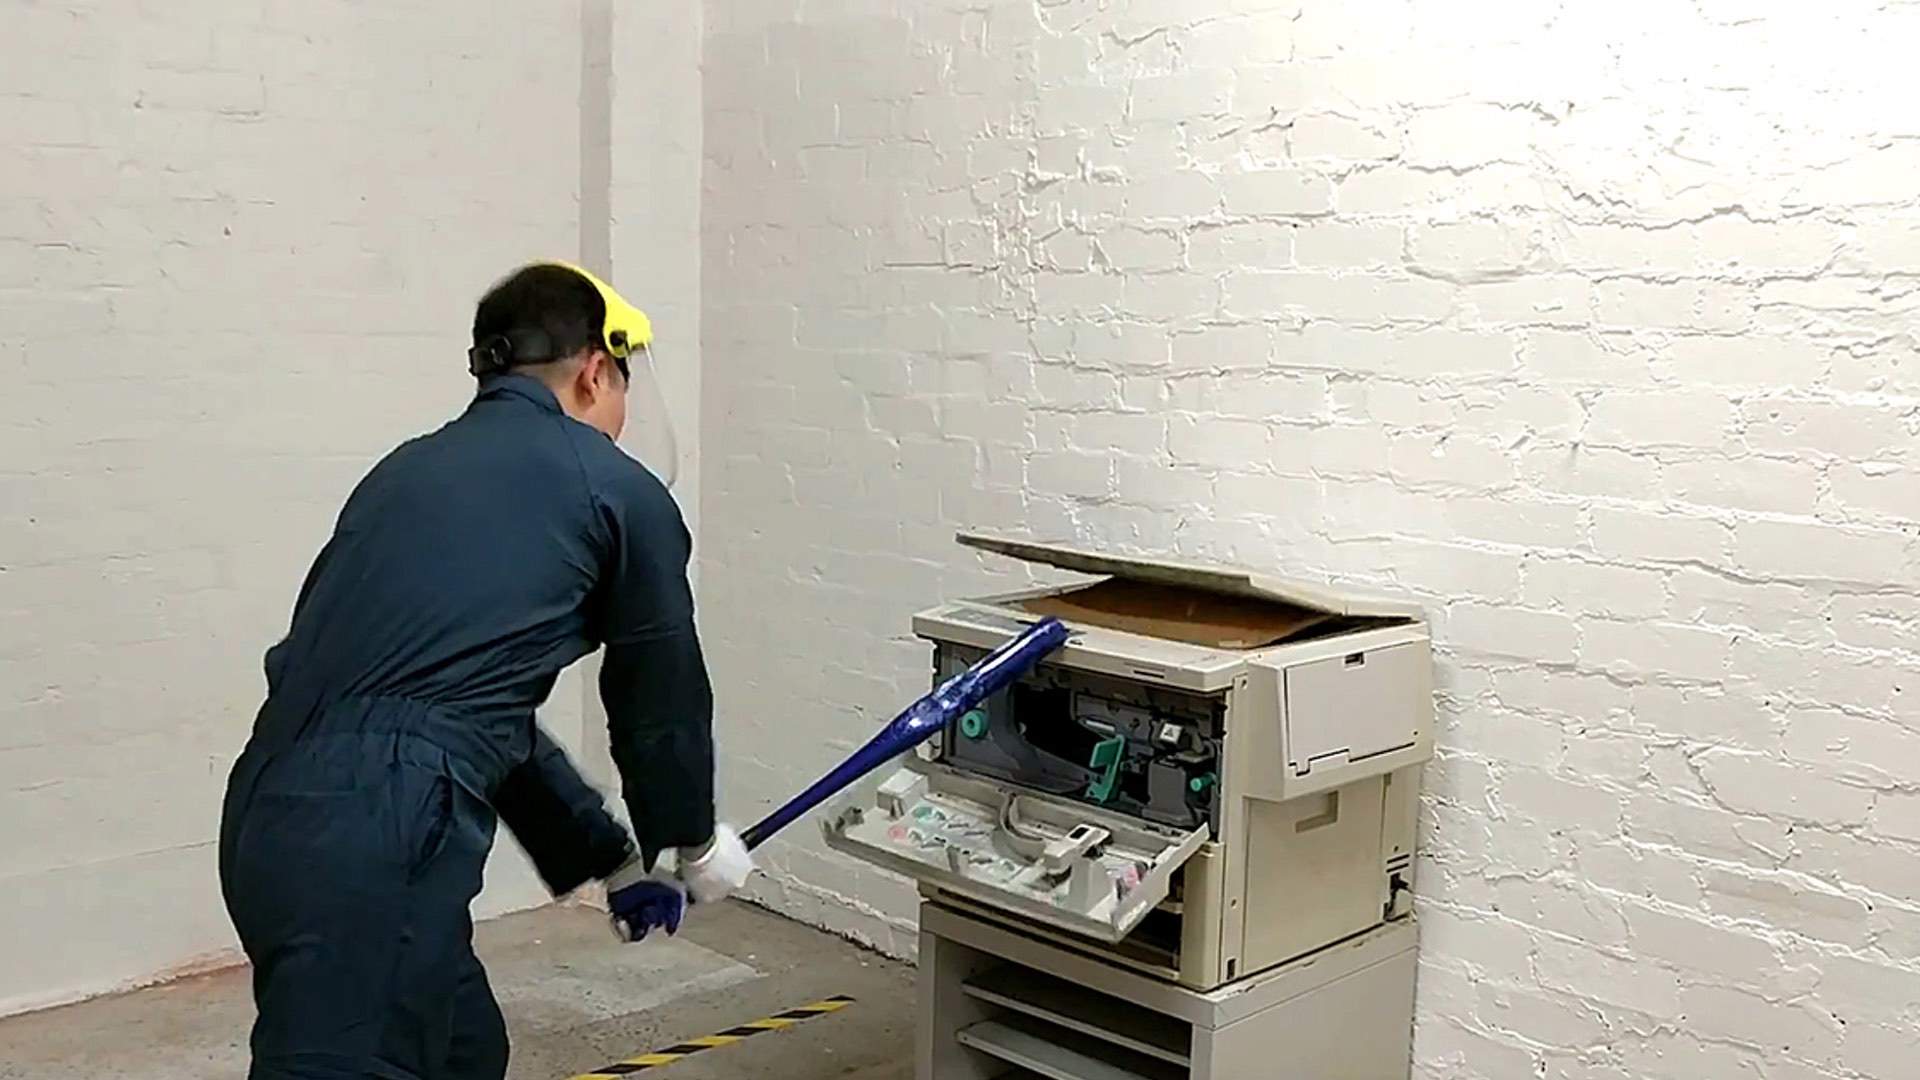 This New Sydney Pop-Up Lets You Smash Stuff with a Baseball Bat